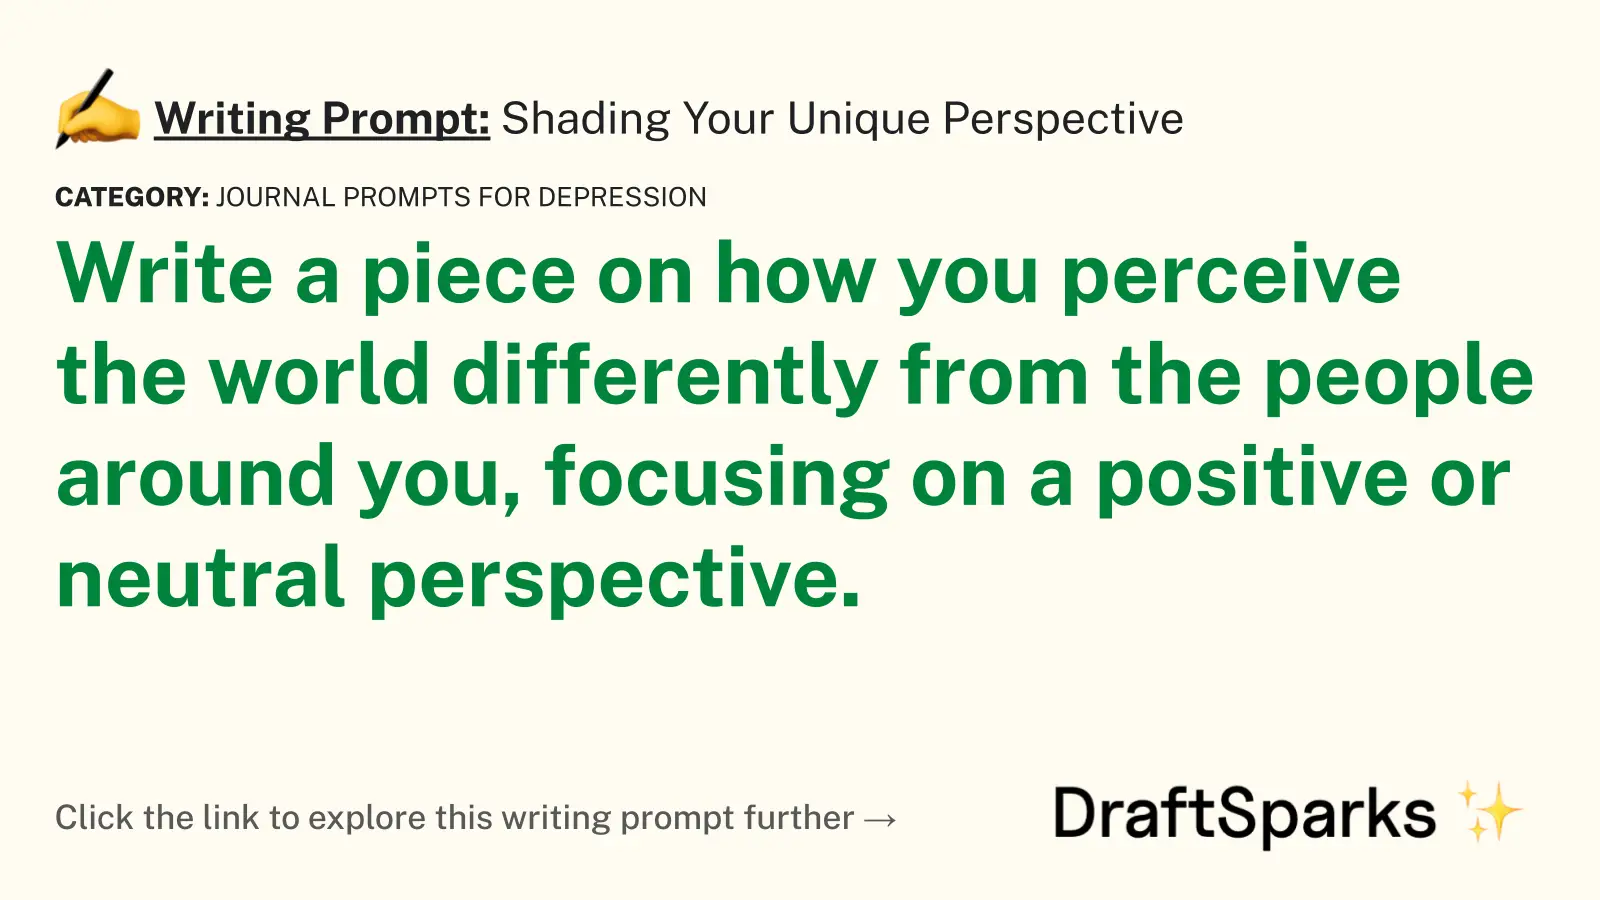 Shading Your Unique Perspective